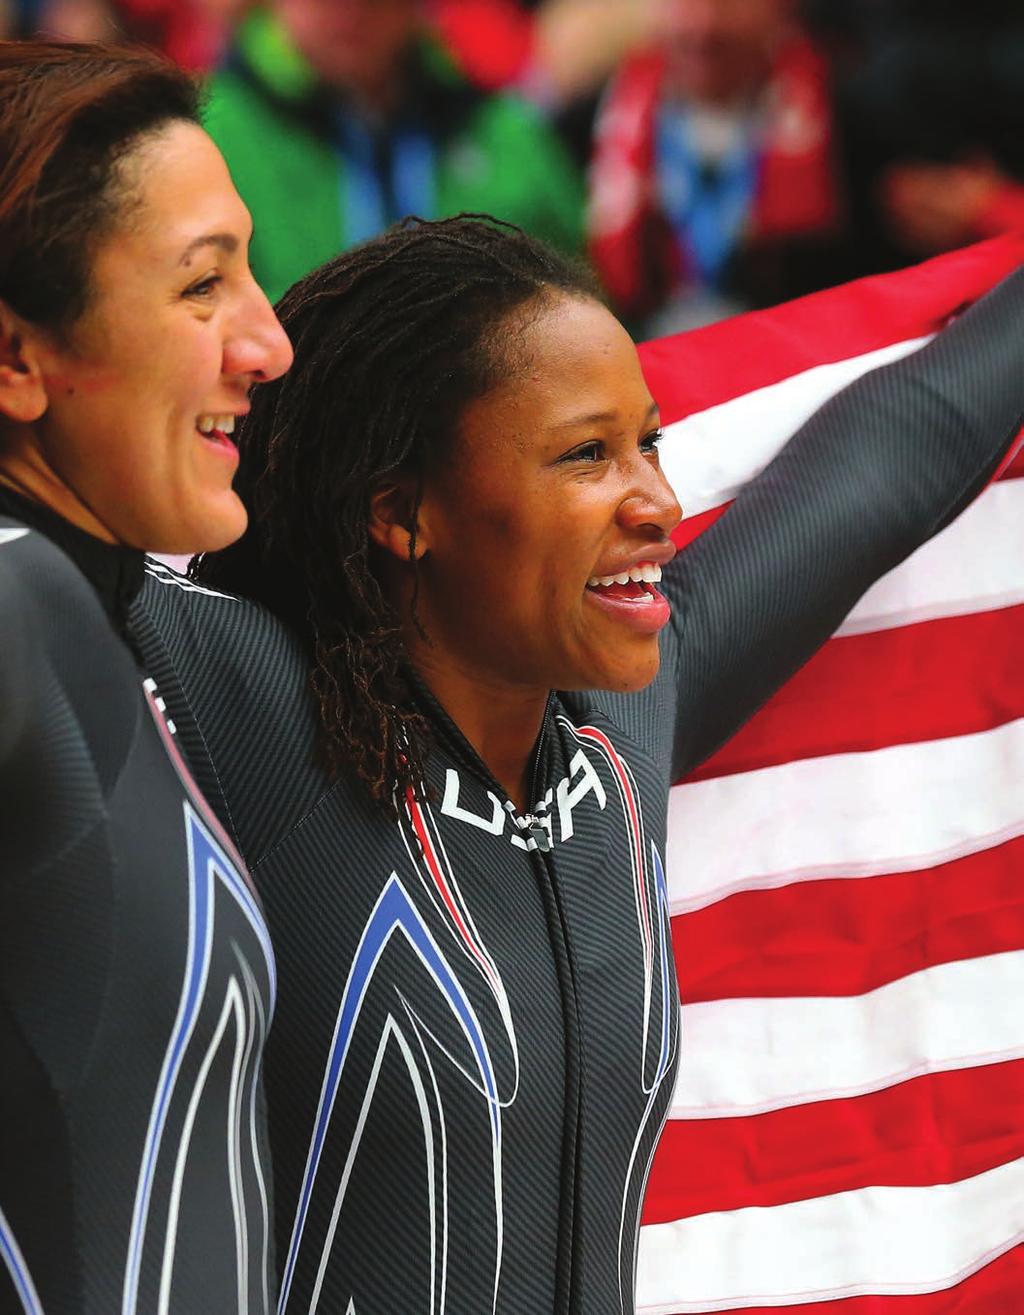 ATHLETE CAREER AND EDUCATION PROGRAM Following recommendations of a 2012 Board Working Group, the USOC committed to playing a leadership role in the expansion and integration of athlete career and